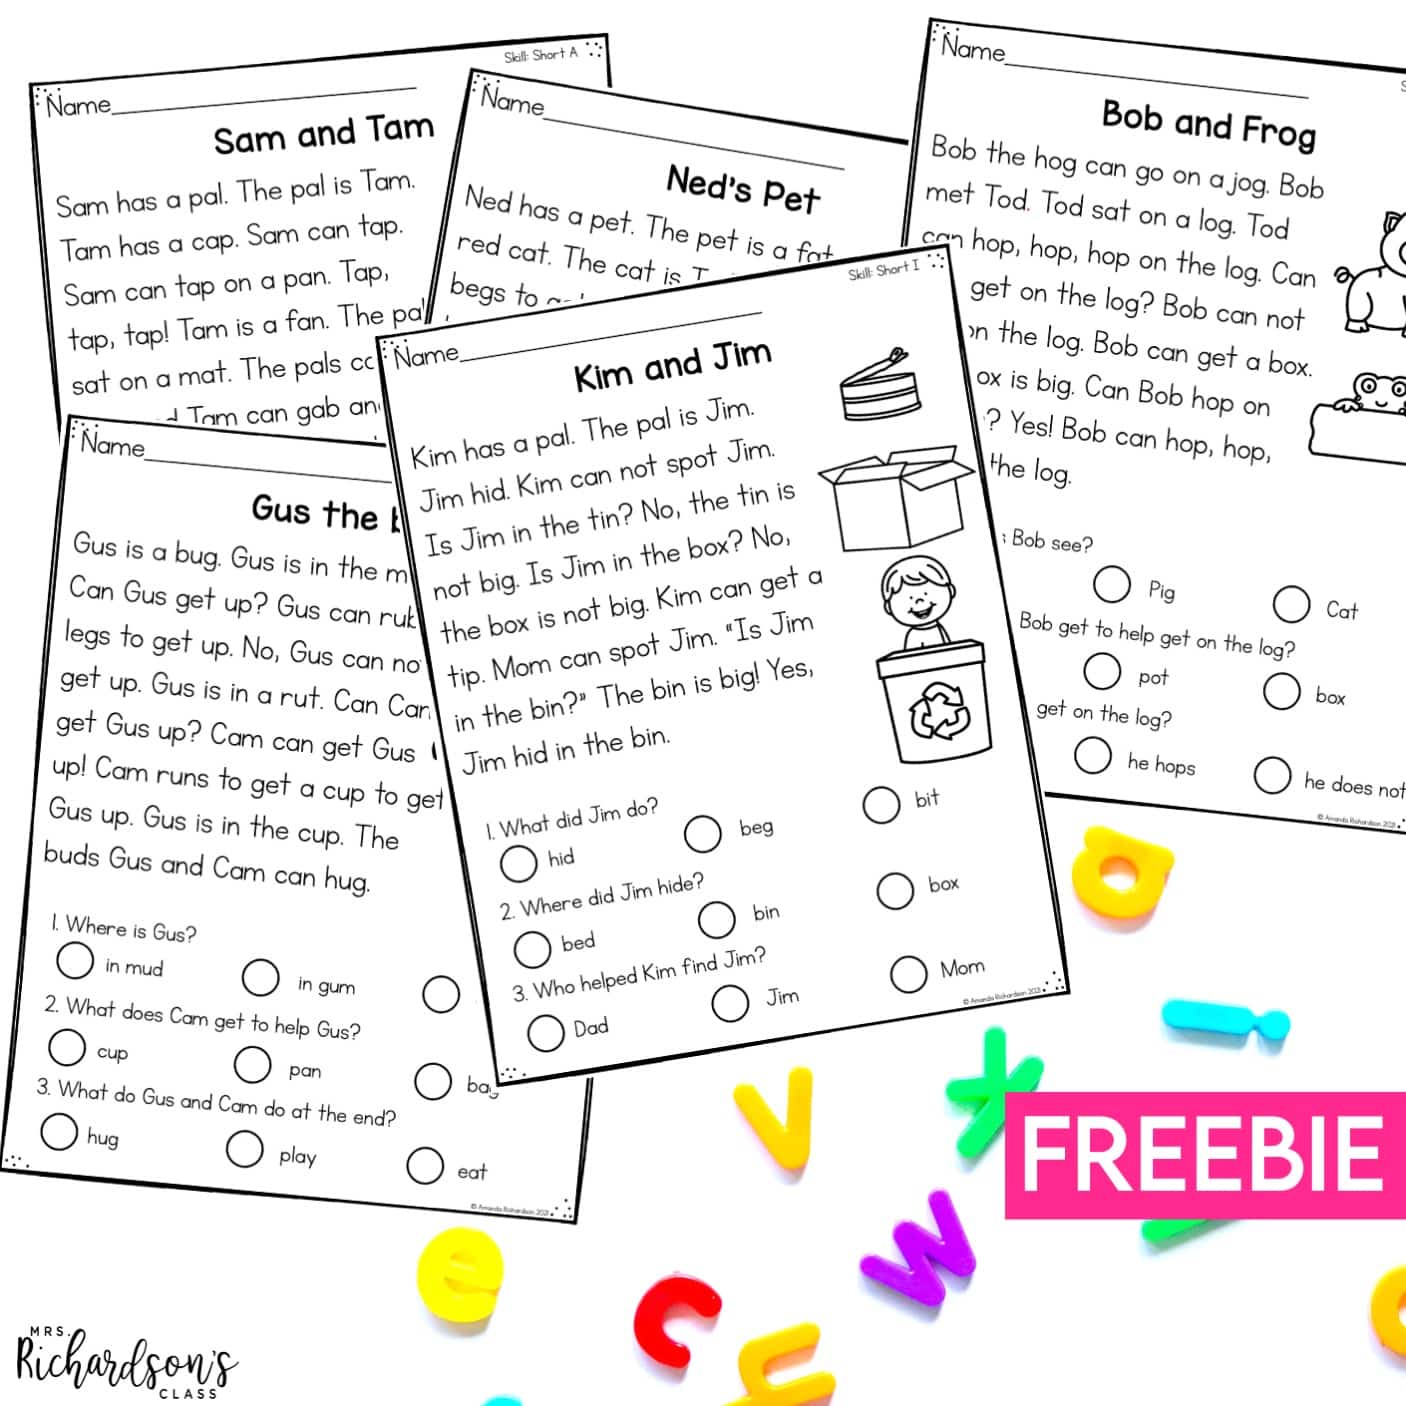 carissa-taylor-free-and-affordable-decodable-readers-60-off